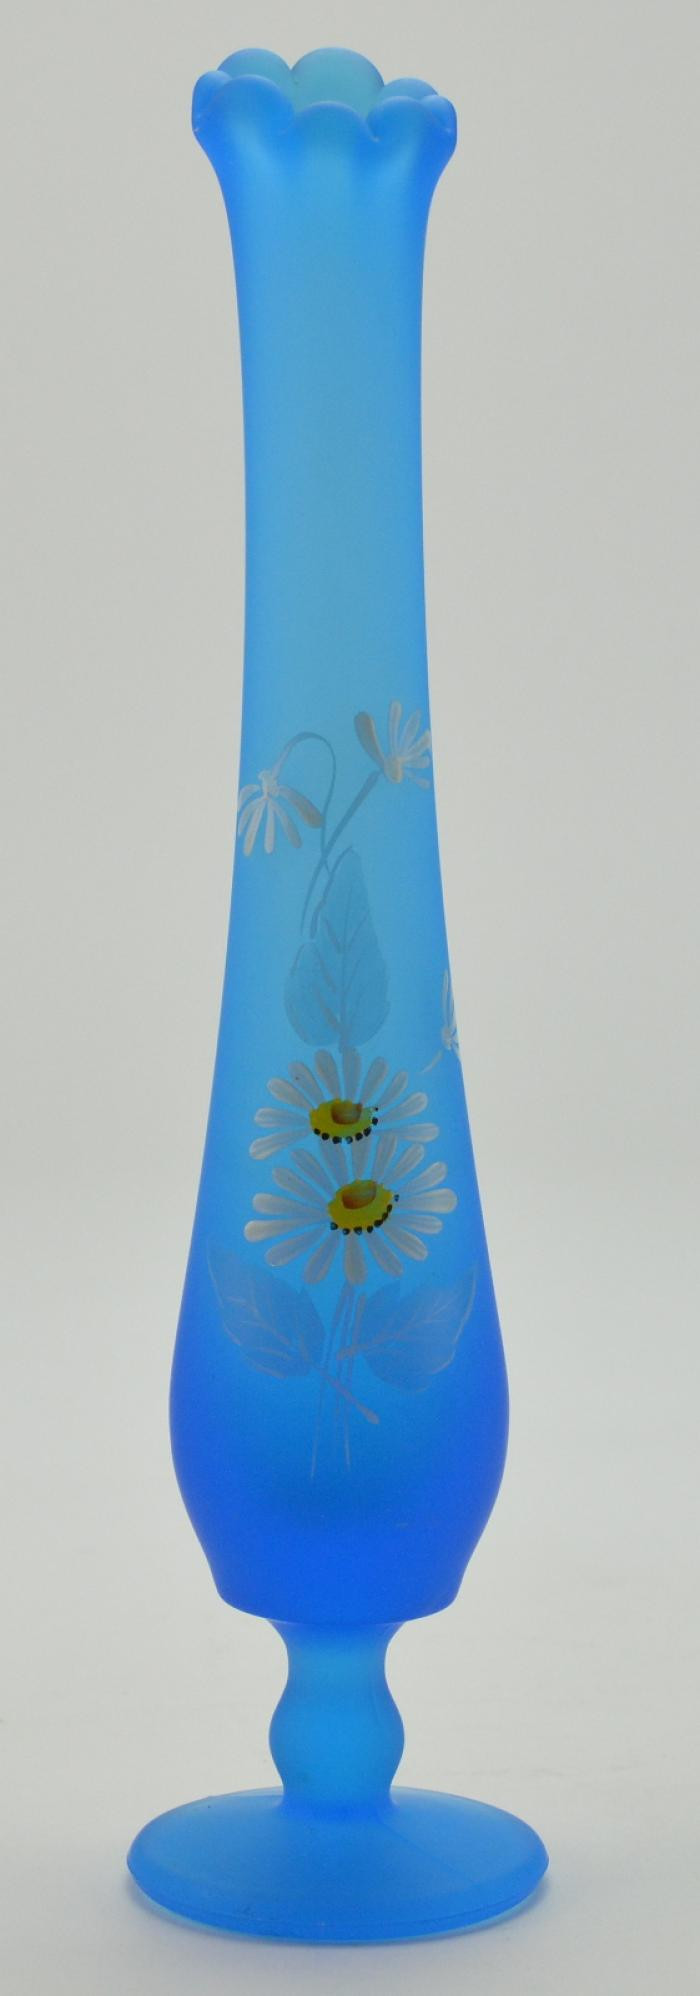 25 Great Hand Blown Glass Bud Vase 2024 free download hand blown glass bud vase of blue glass bud vase vase and cellar image avorcor com with regard to blue gl bud vase and cellar image avorcor